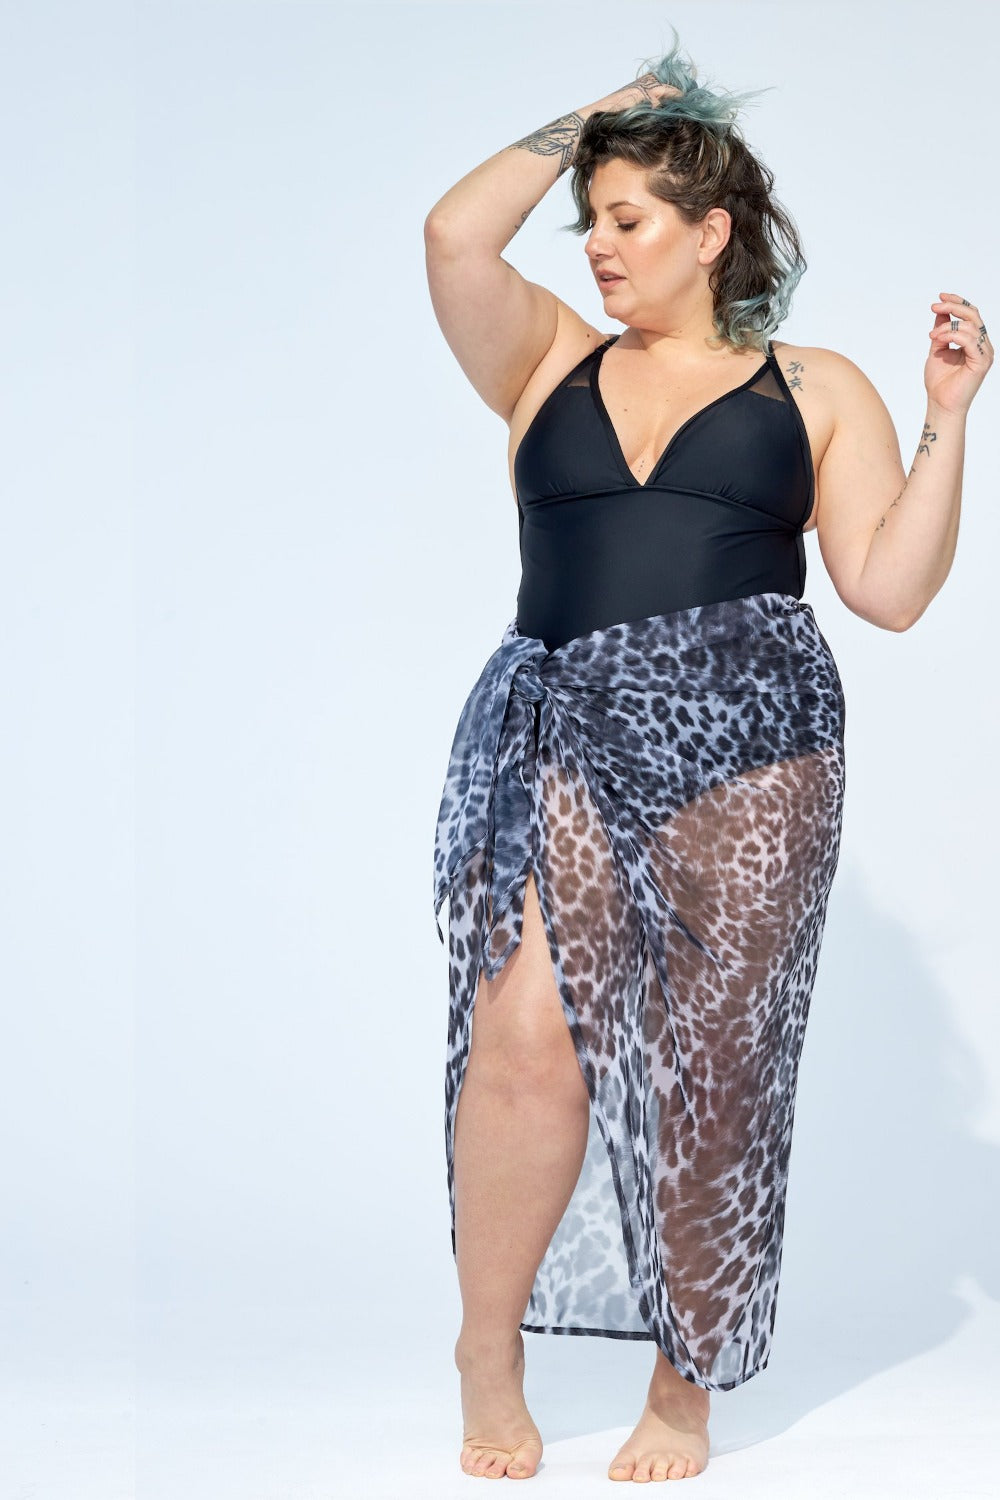 Plus Size Beach Club Pareo Swimsuit Cover Up from Cover Me – Sportive Plus